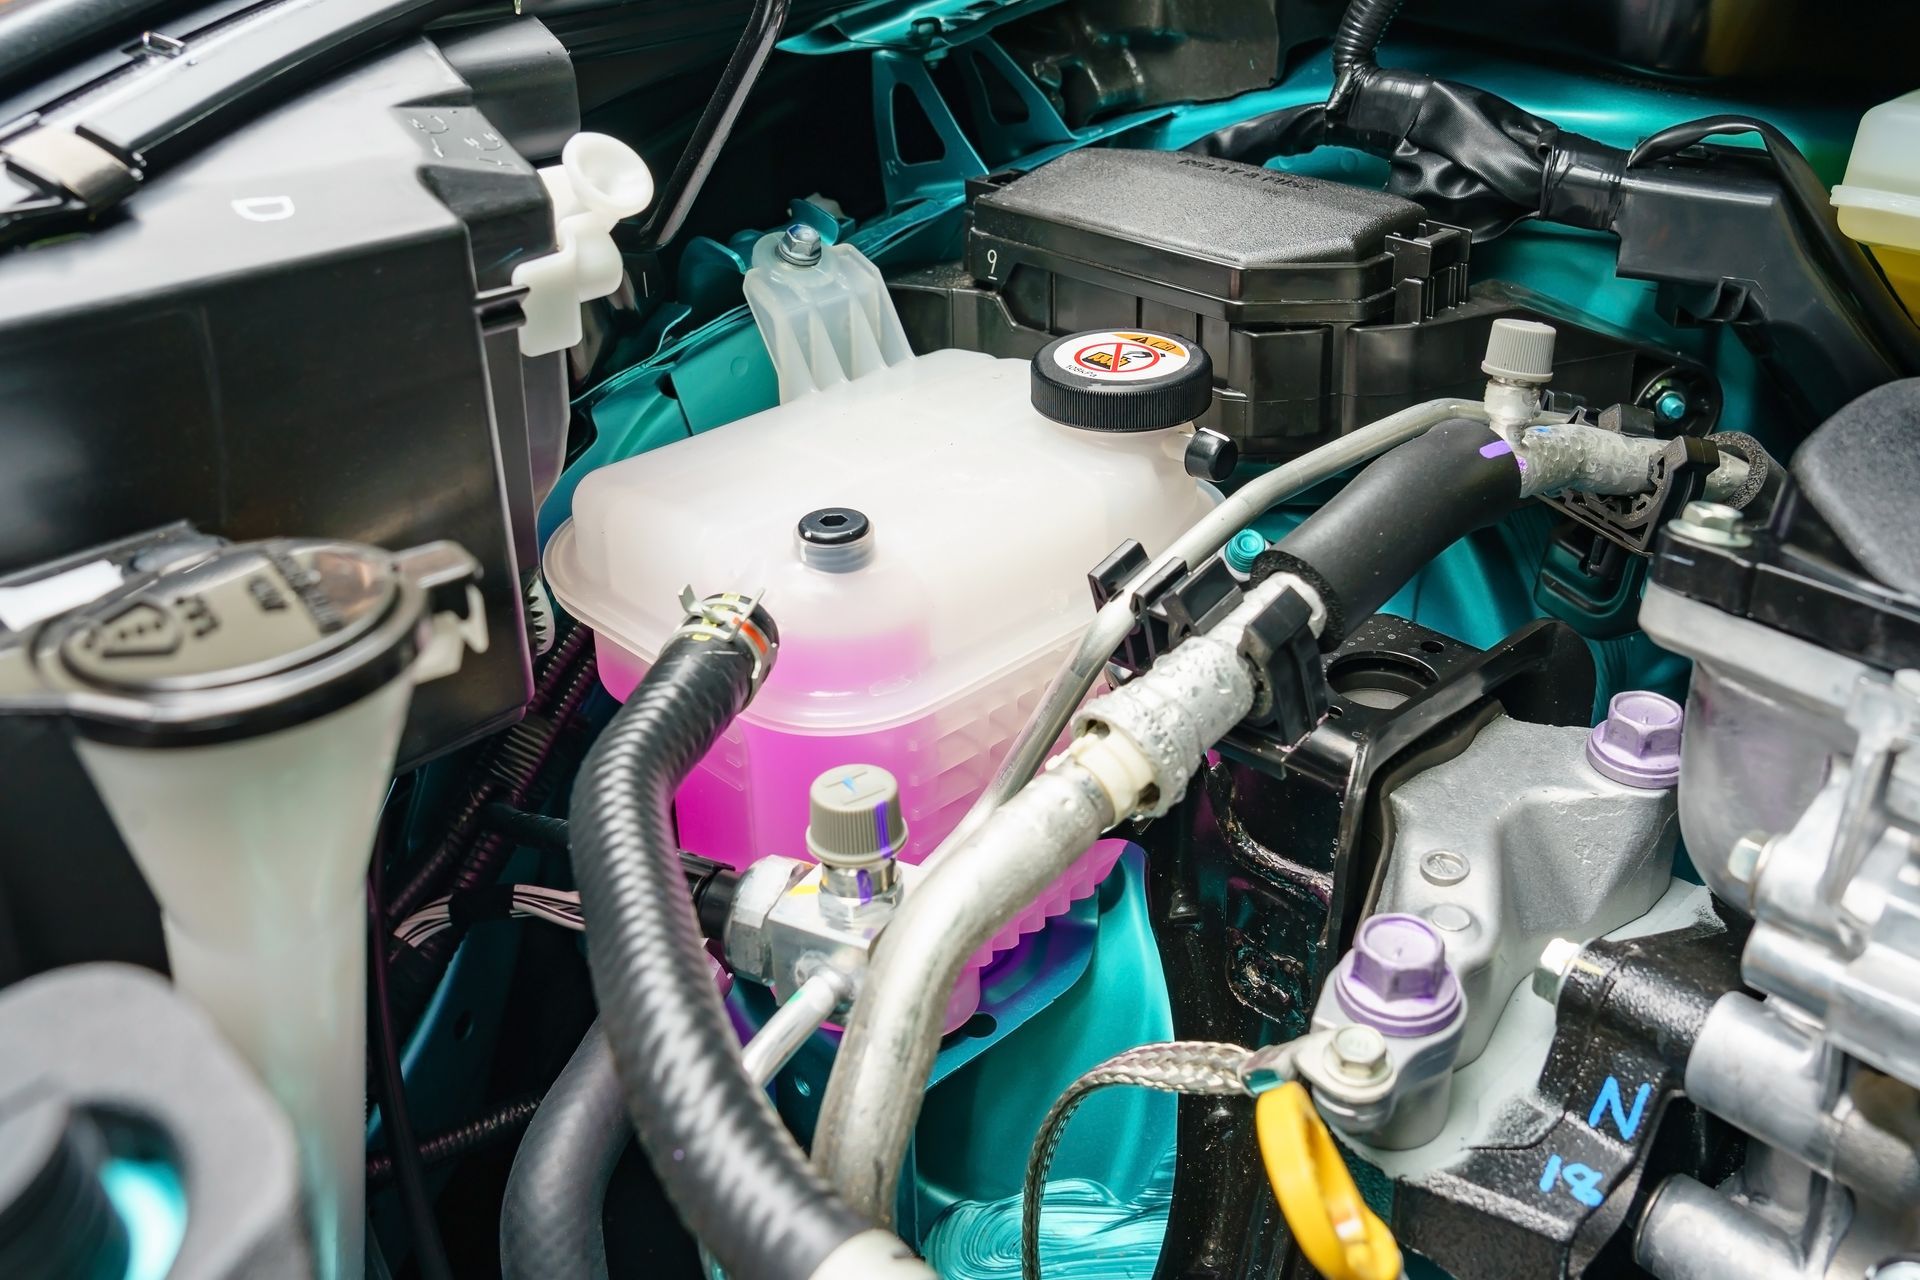 Cooling System Service at ﻿Jerry's Auto Repair﻿ in ﻿Pullman, WA﻿